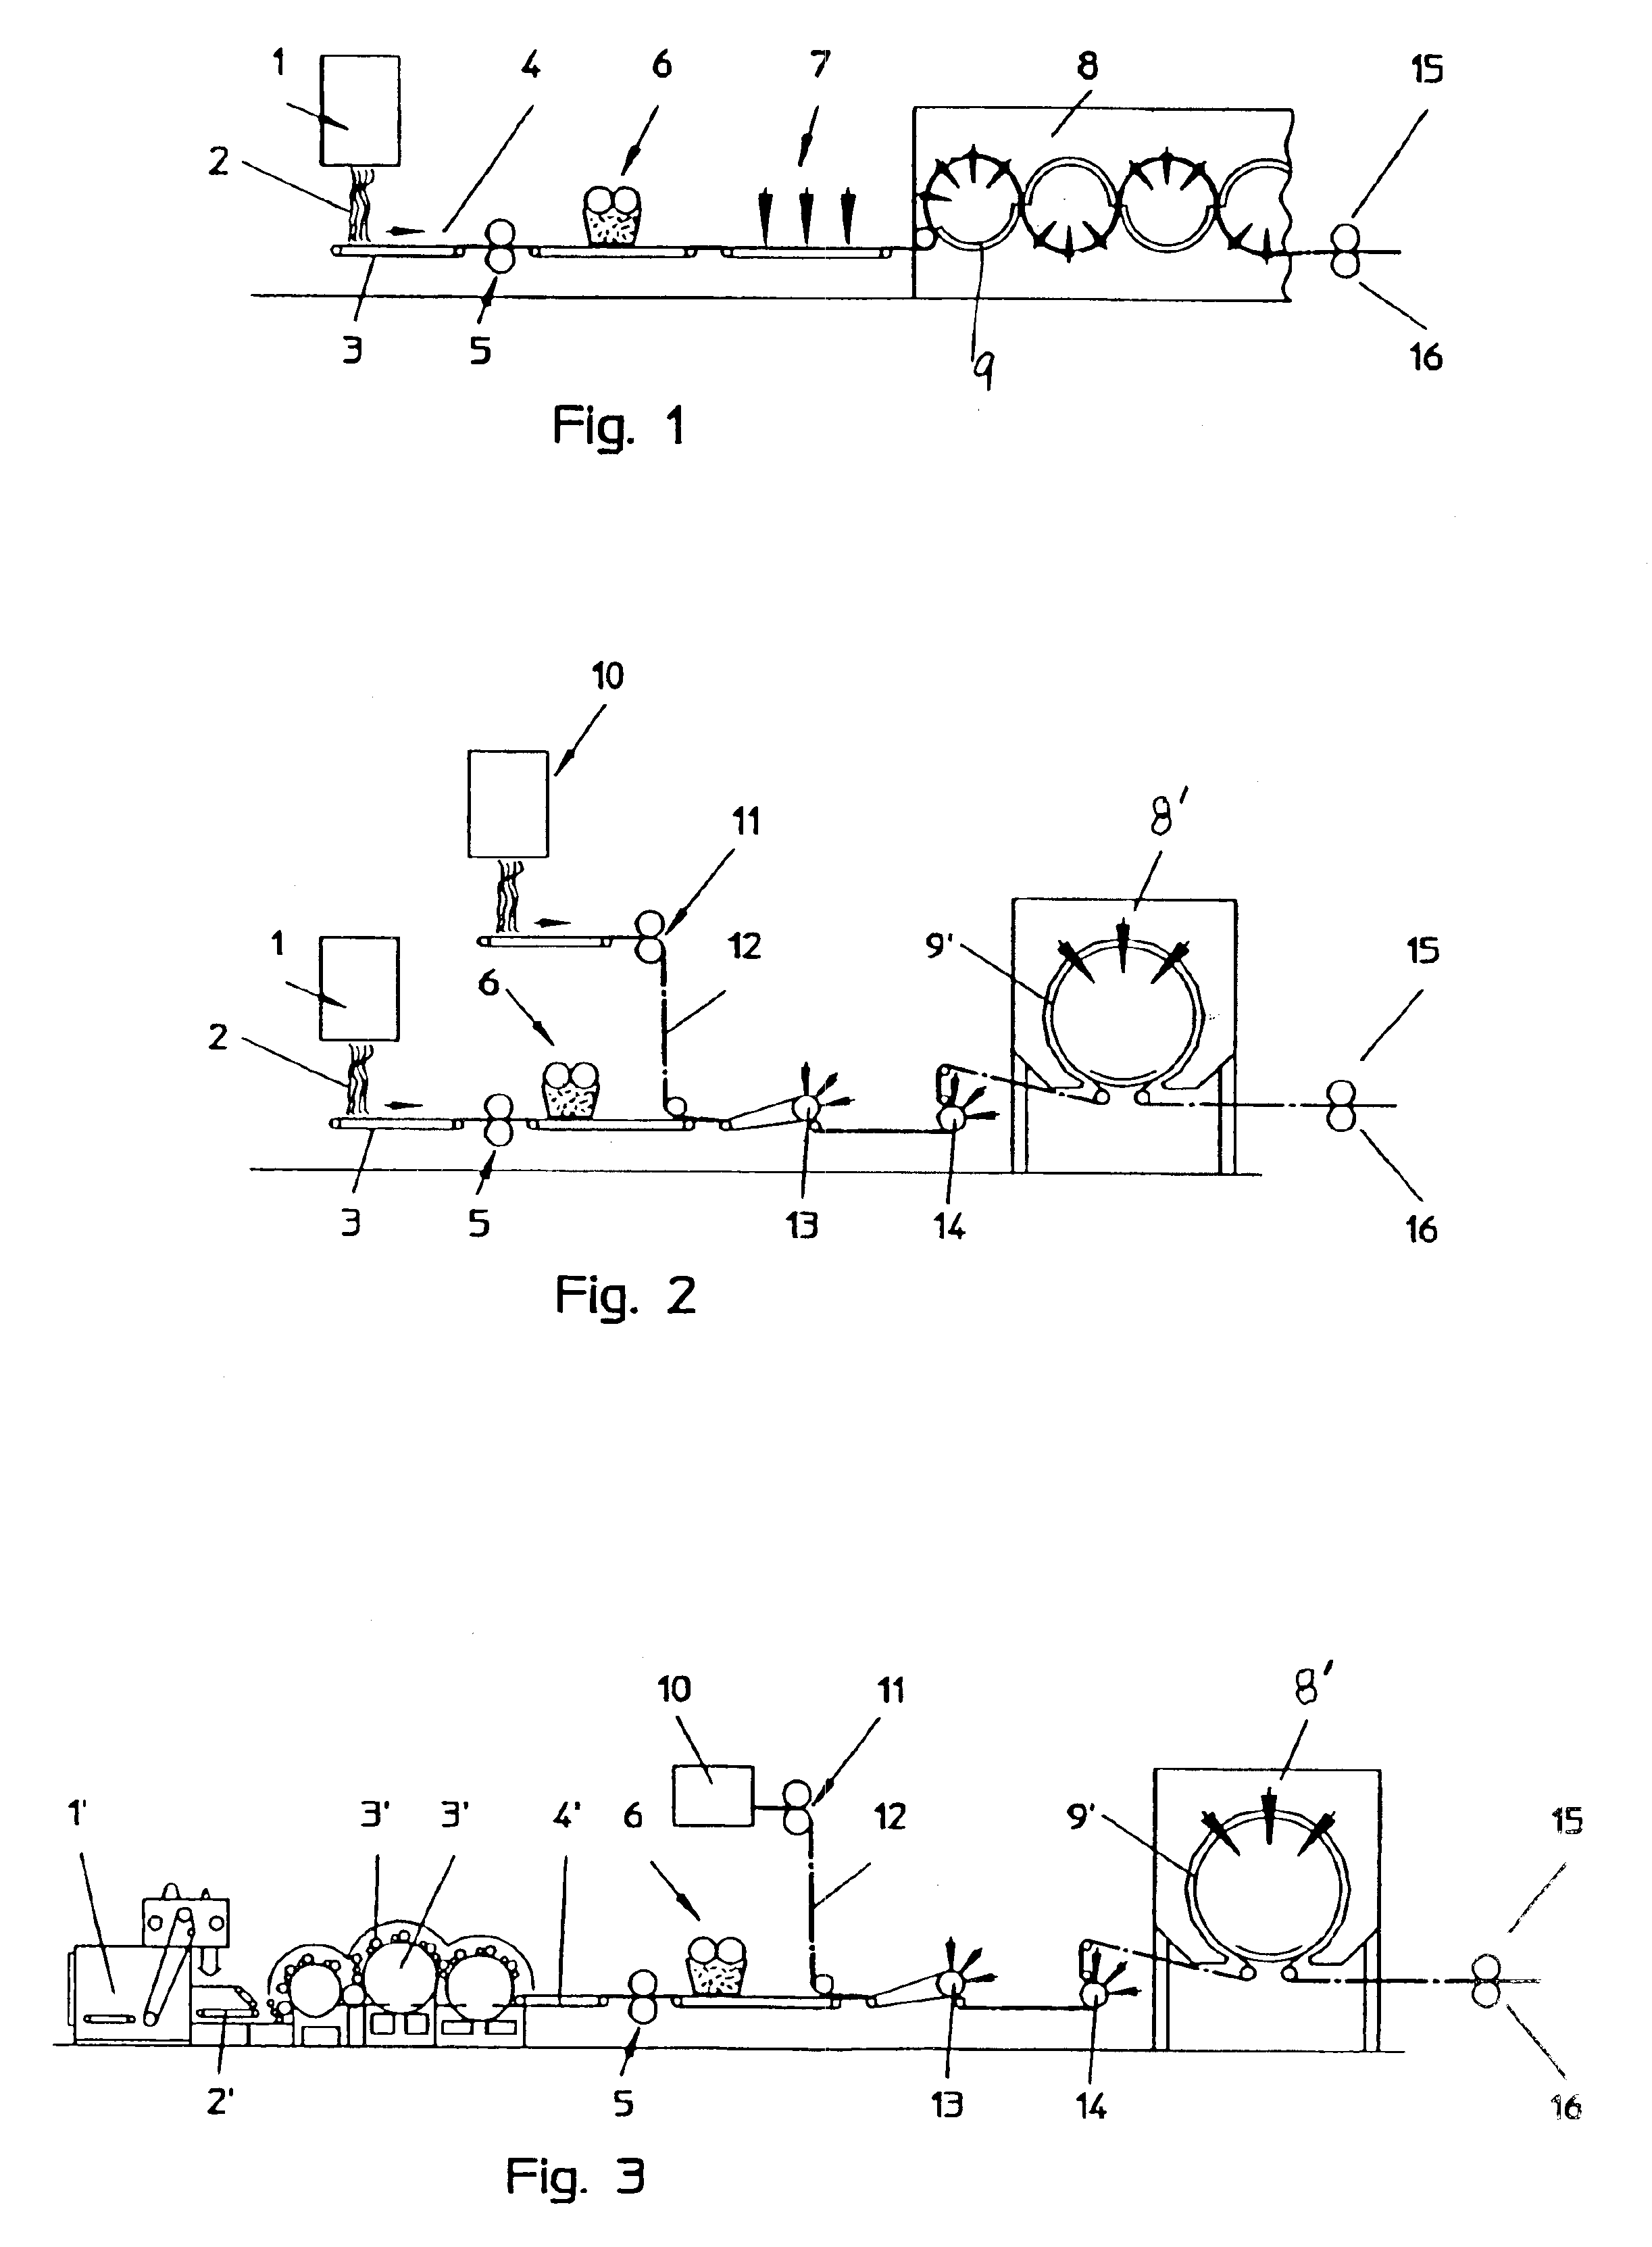 Method and device for production of composite non-woven fiber fabrics by means of hydrodynamic needling